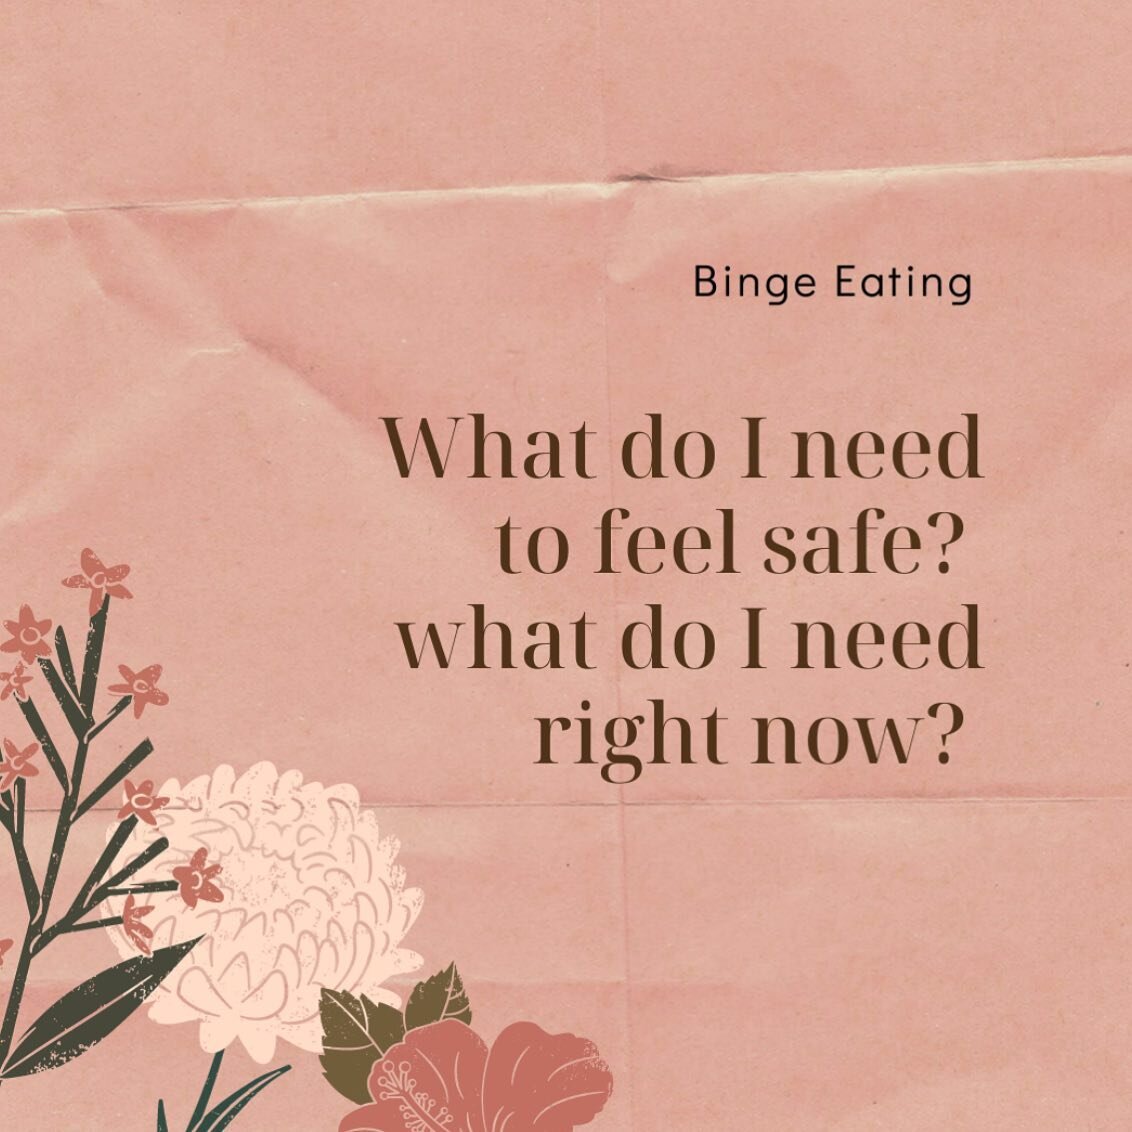 Many of our eating behaviours develop as a result of us attempting to create feelings of safety, comfort, control and as a means to self soothe 🤍

Very rarely have my clients considered this prior to our sessions. Often they scold their eating behav